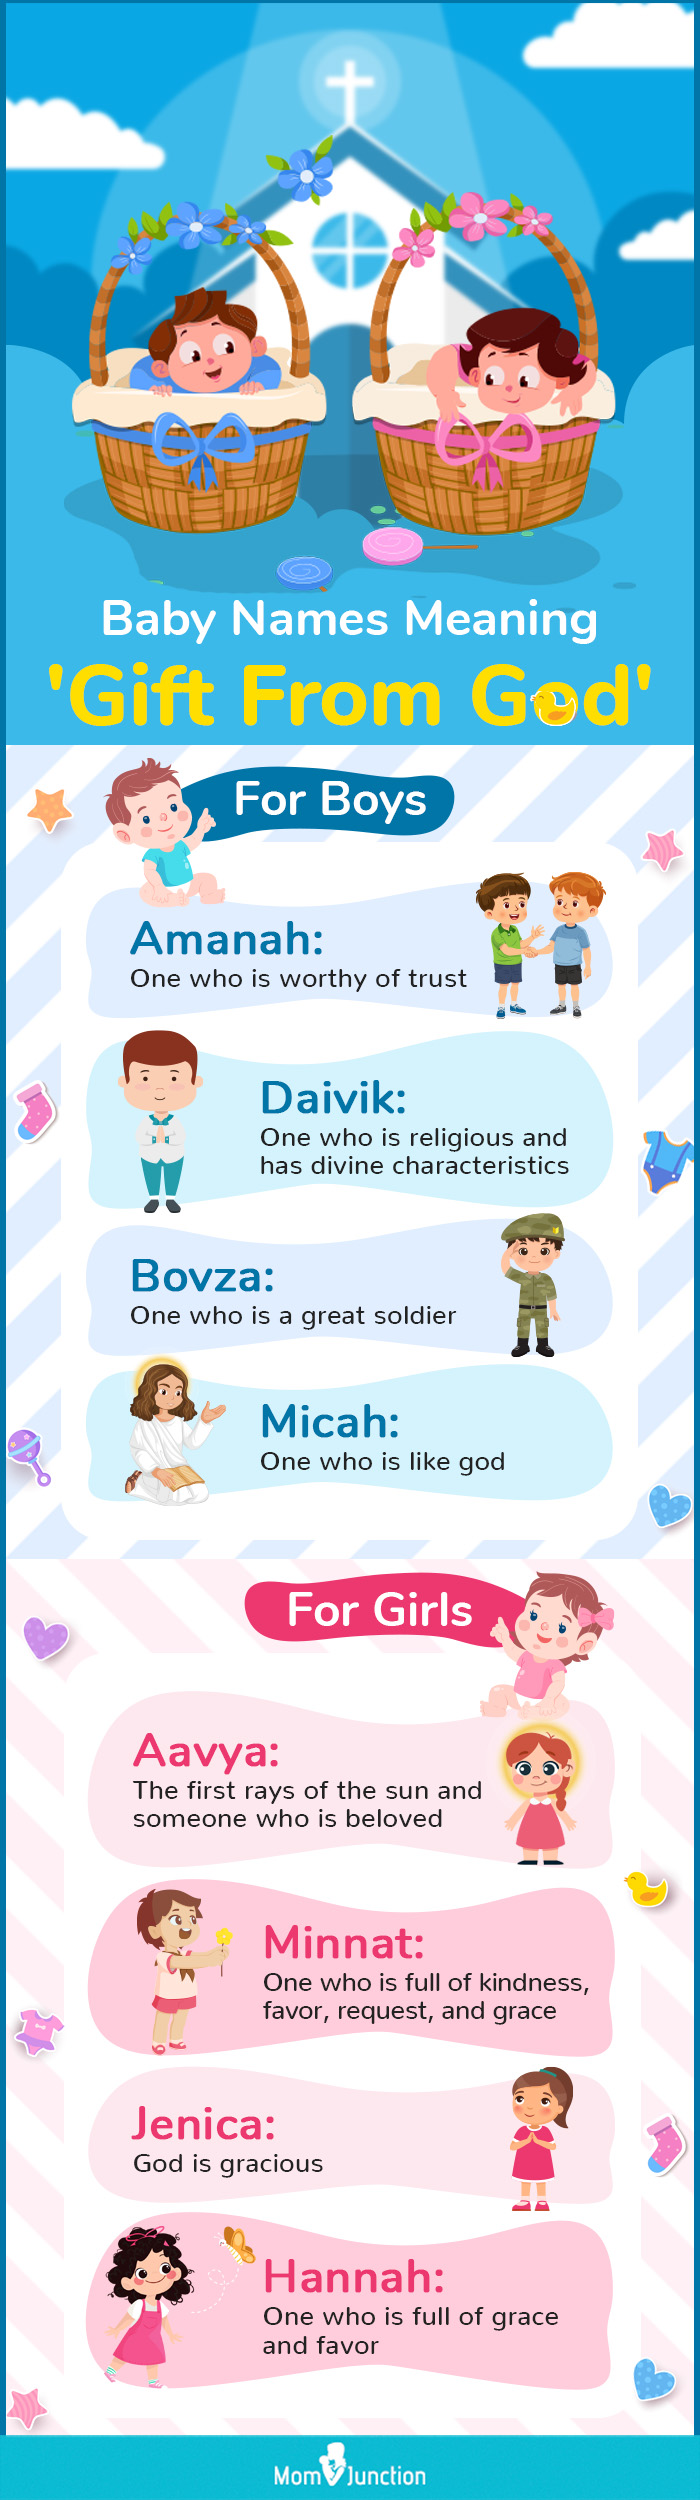 baby names meaning gift from god (infographic)